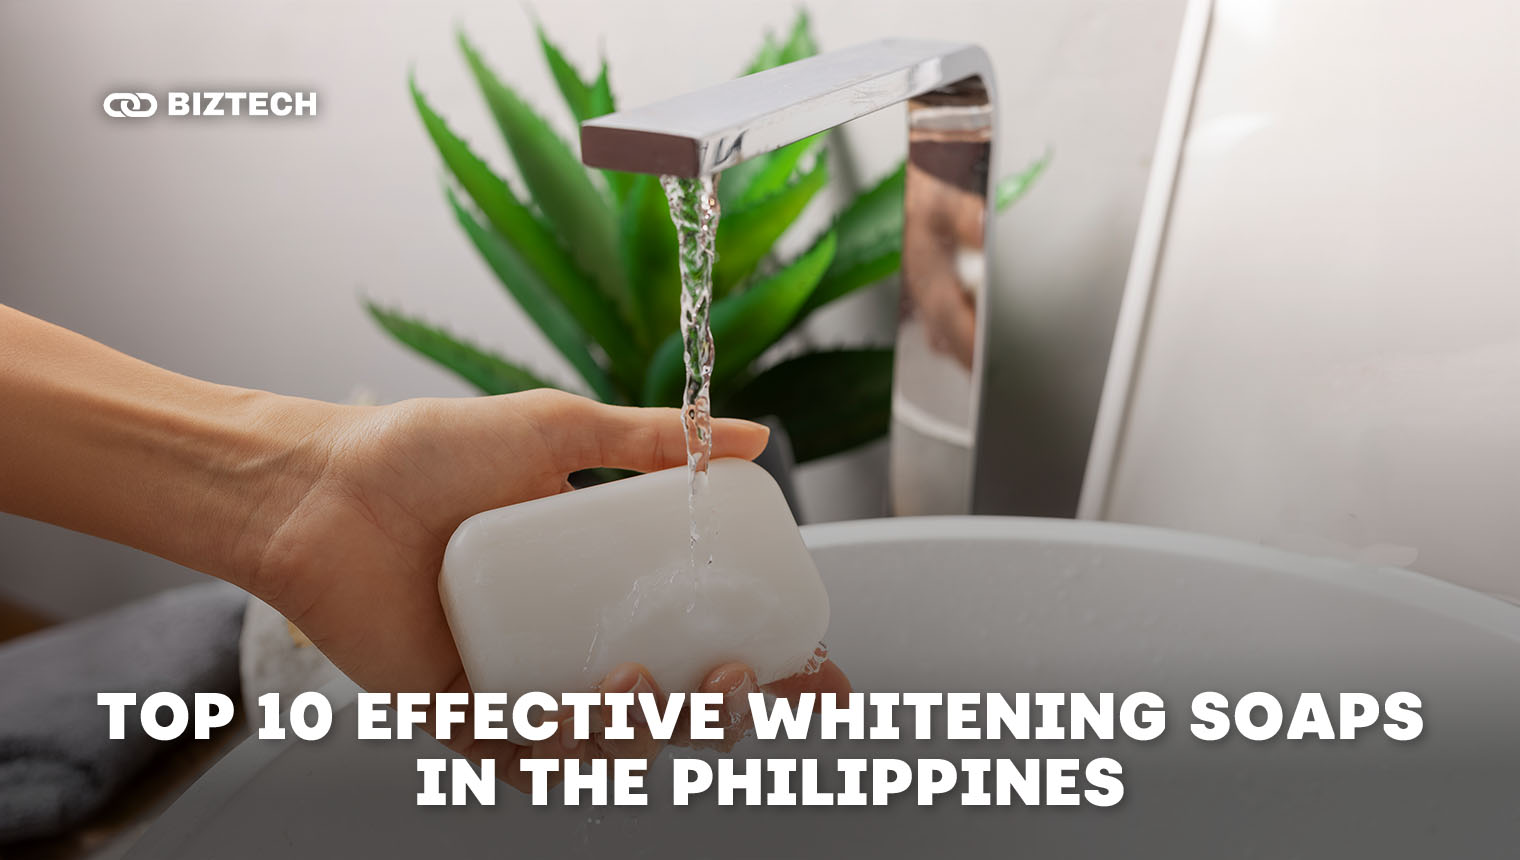 Top 10 Effective Whitening Soaps in the Philippines: Reviewed by Dermatologist